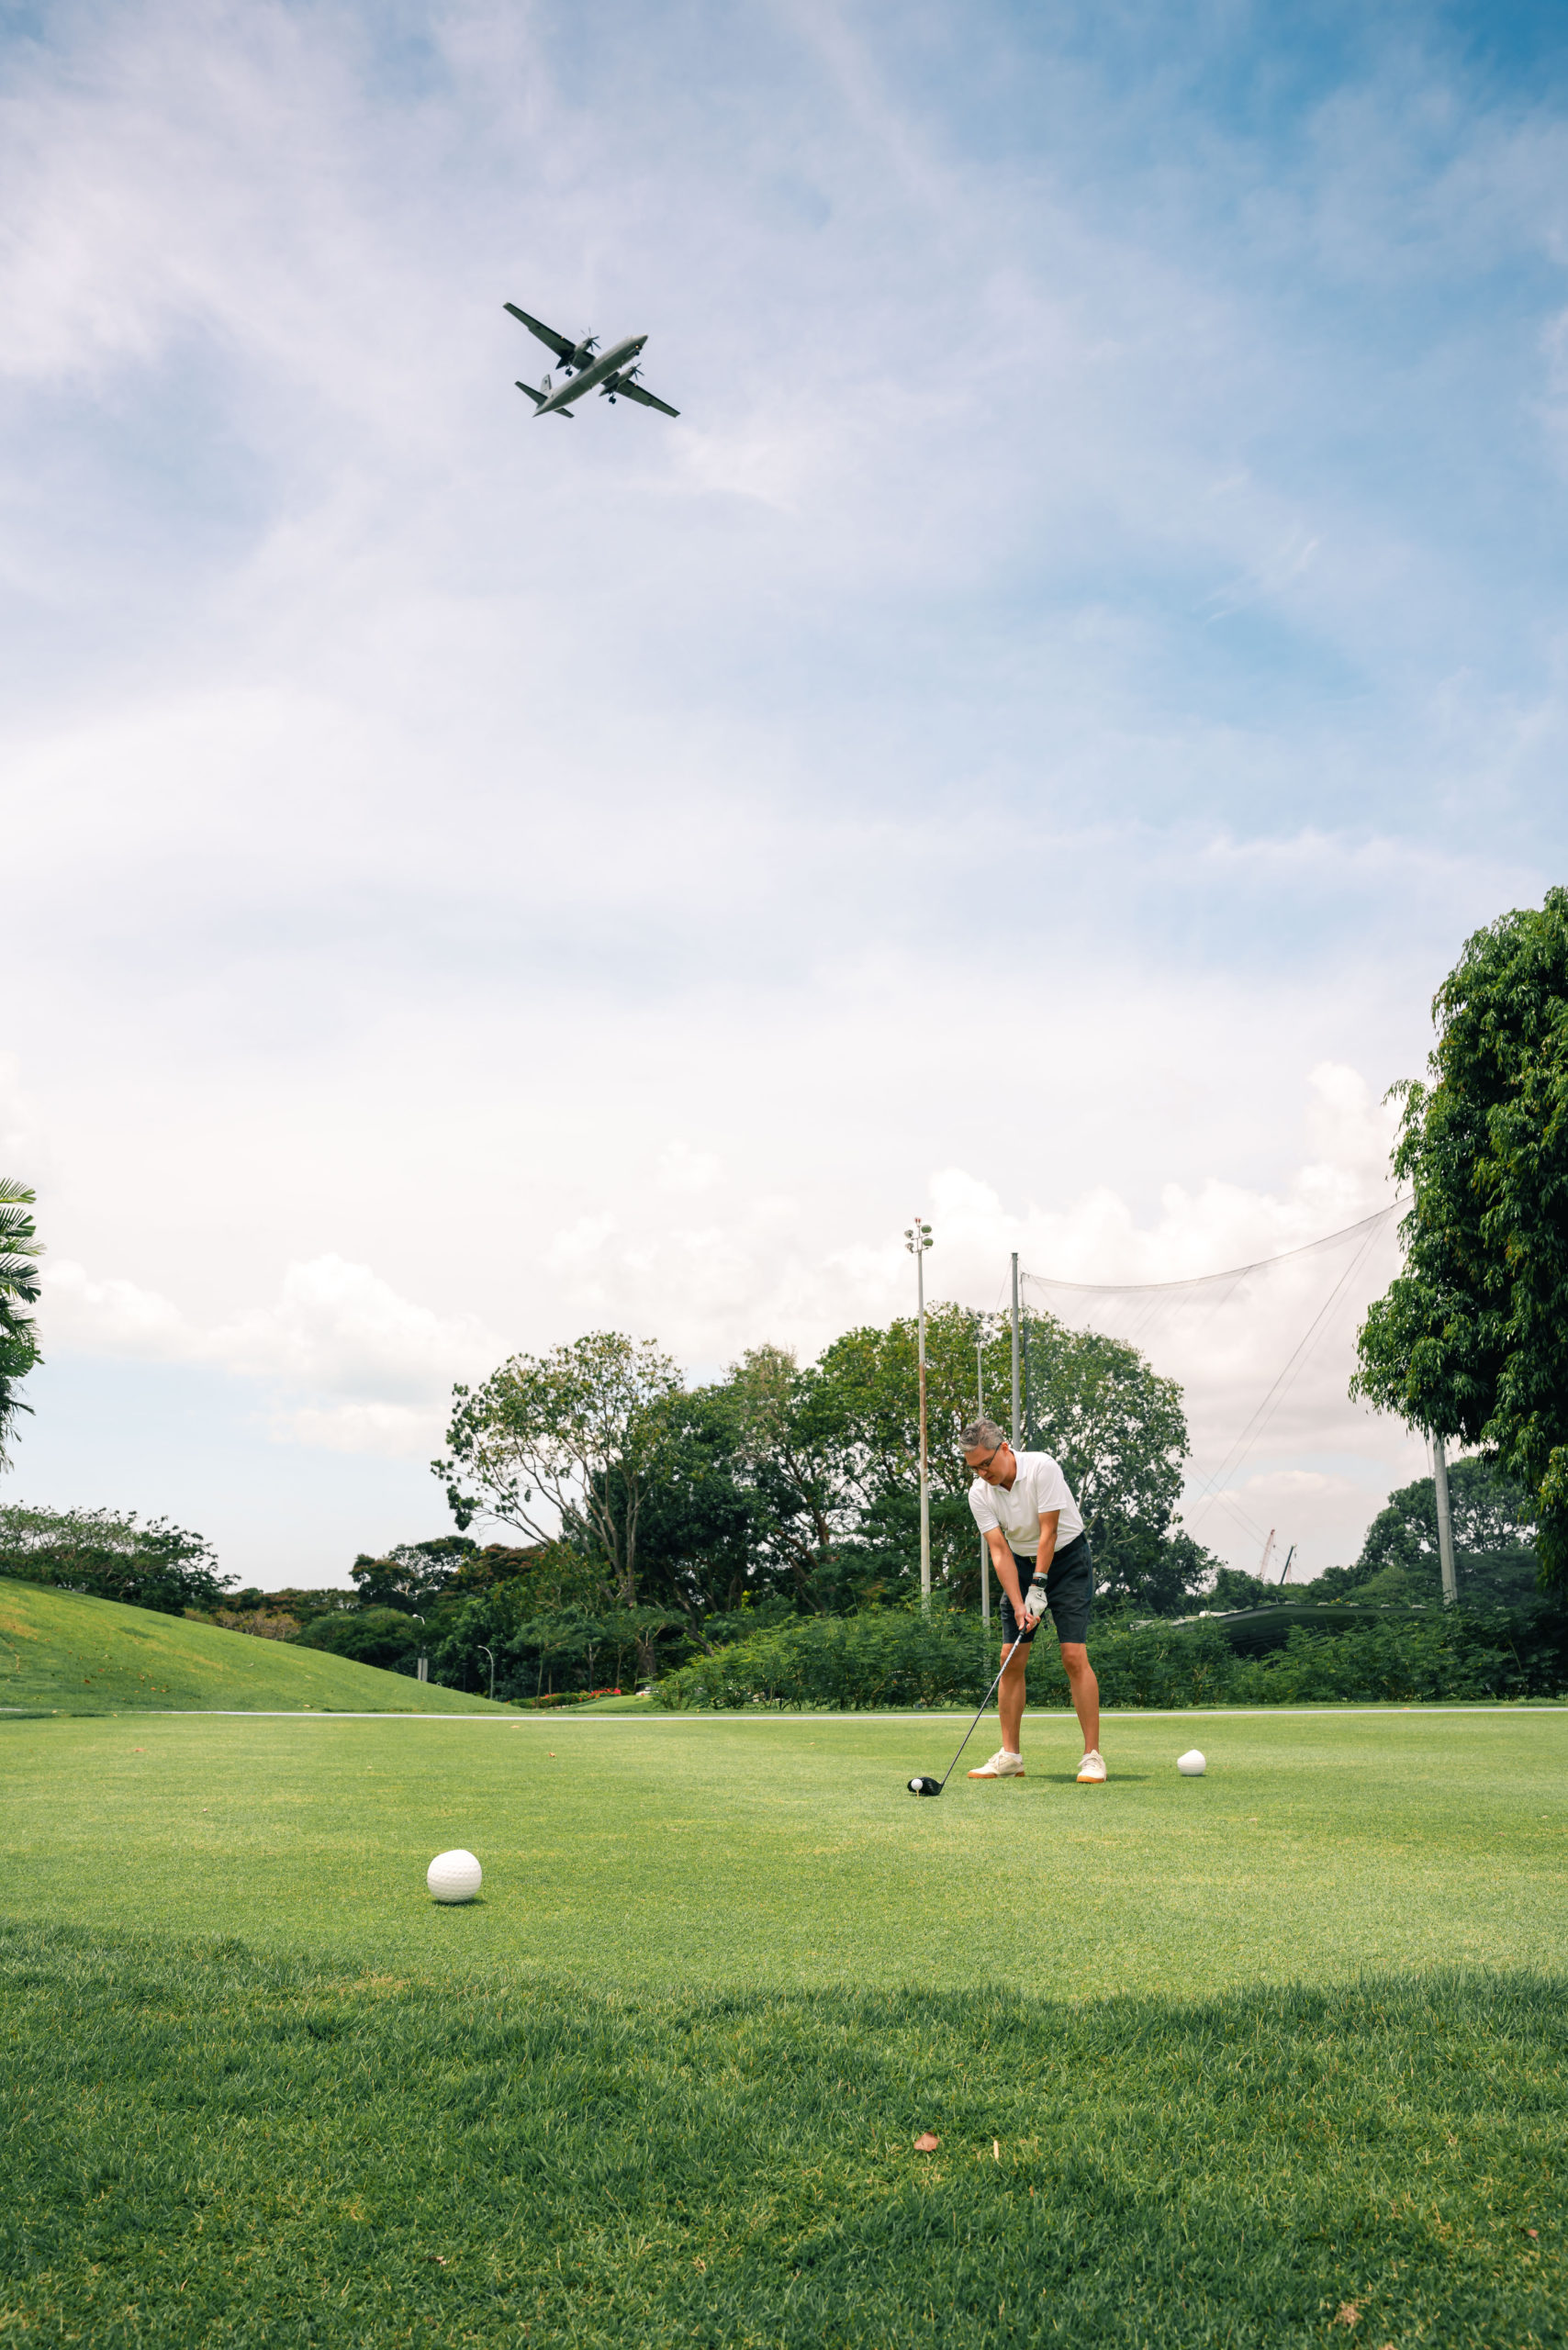 man at golf course with plane flying overhead during an event